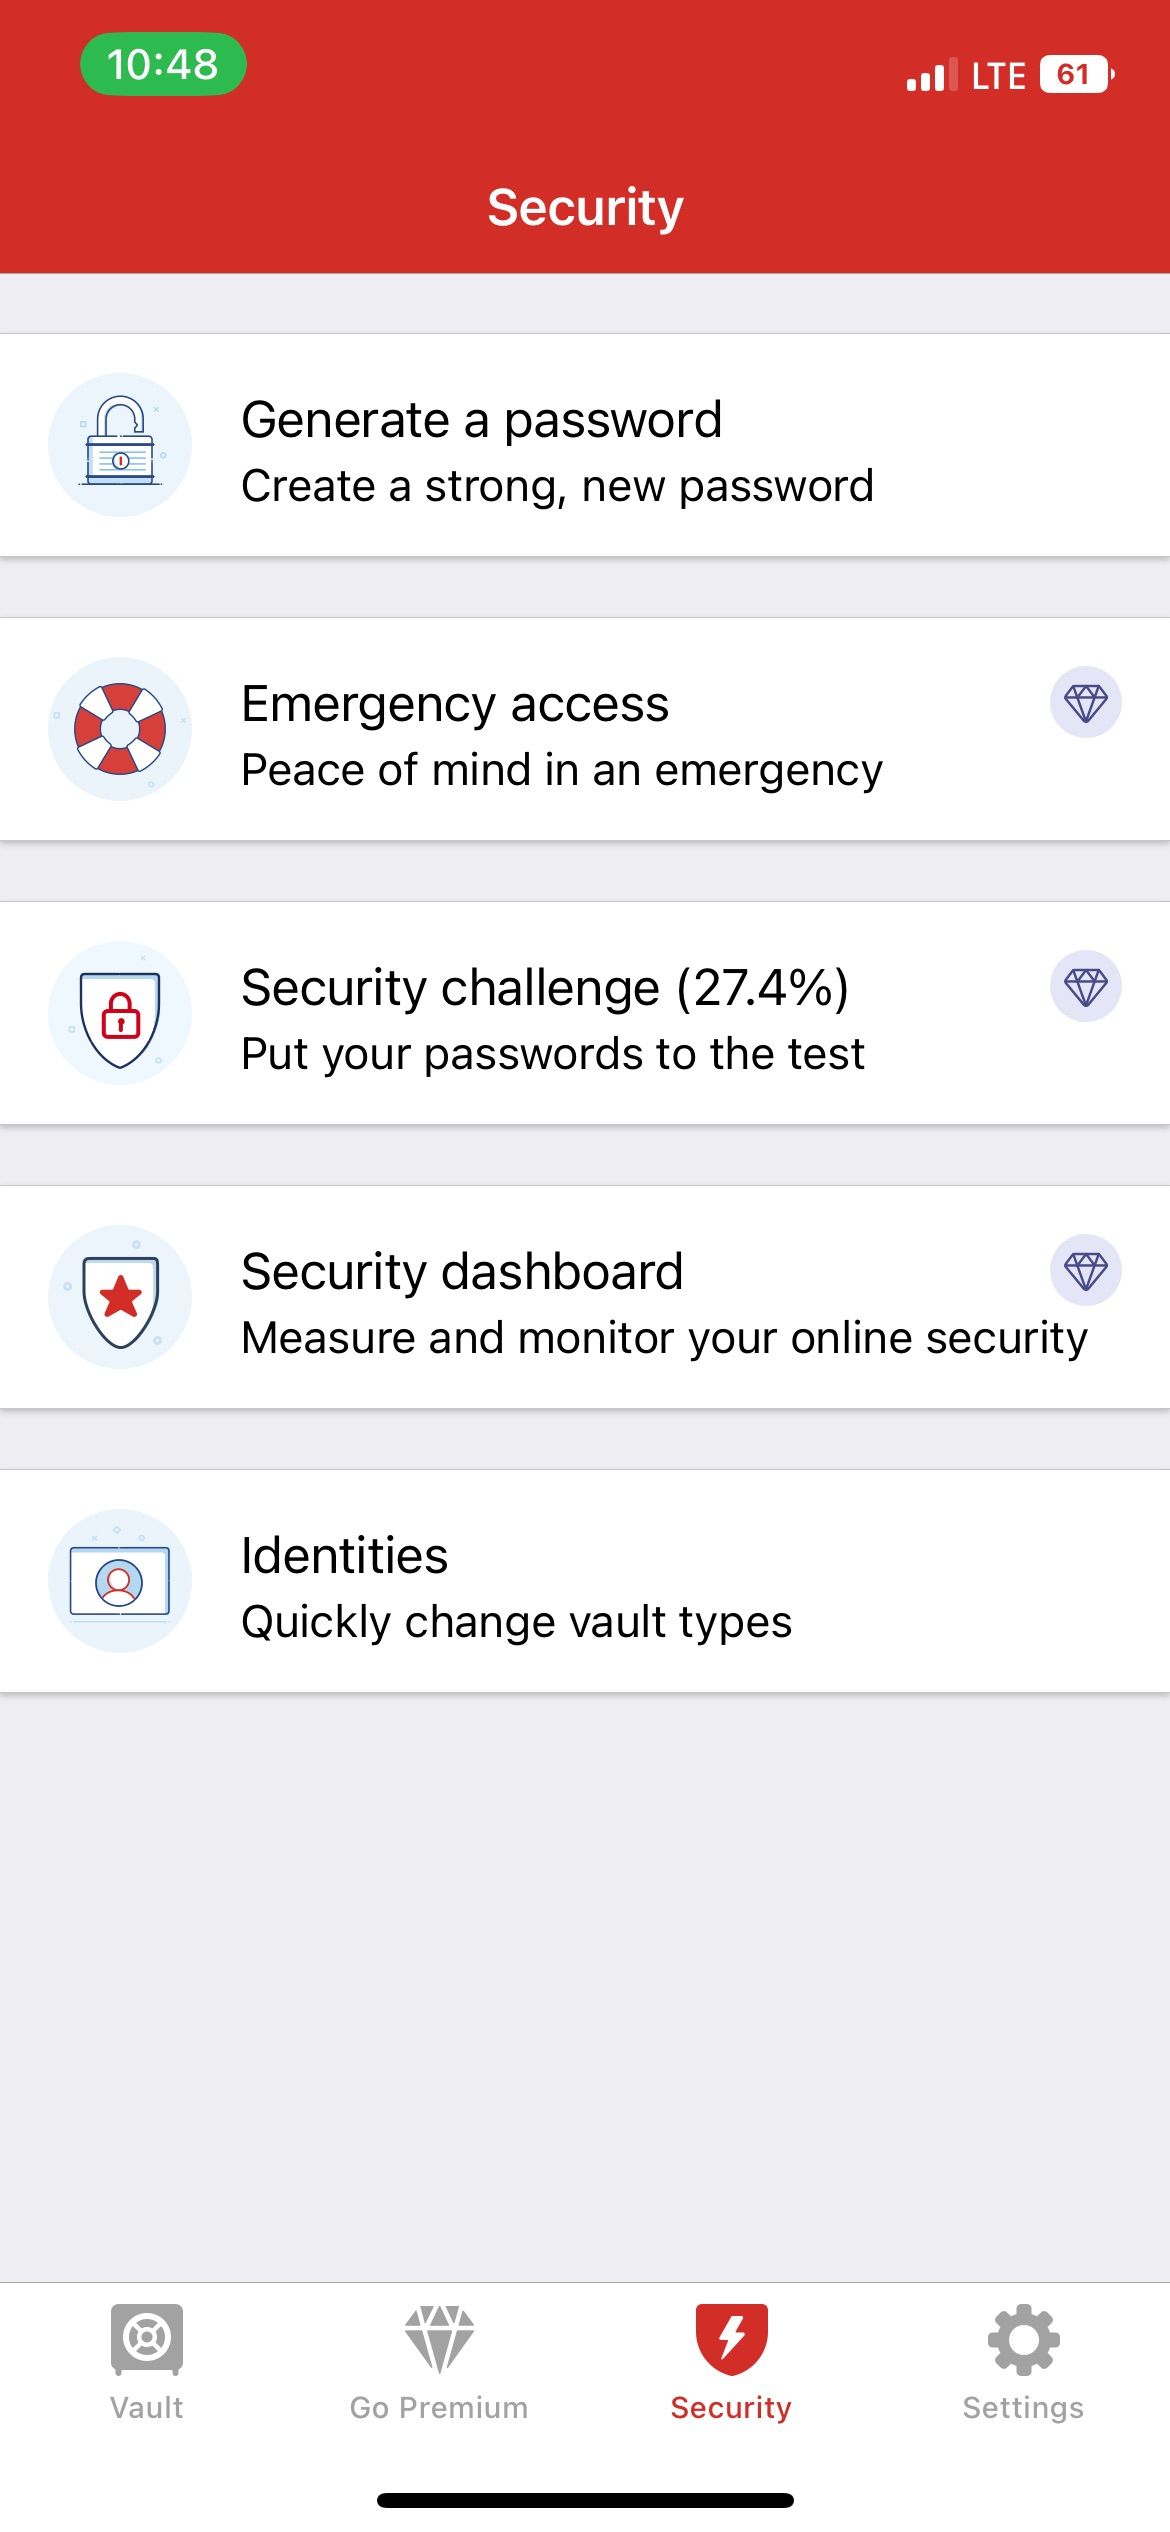 LastPass Security page showing security suggestions